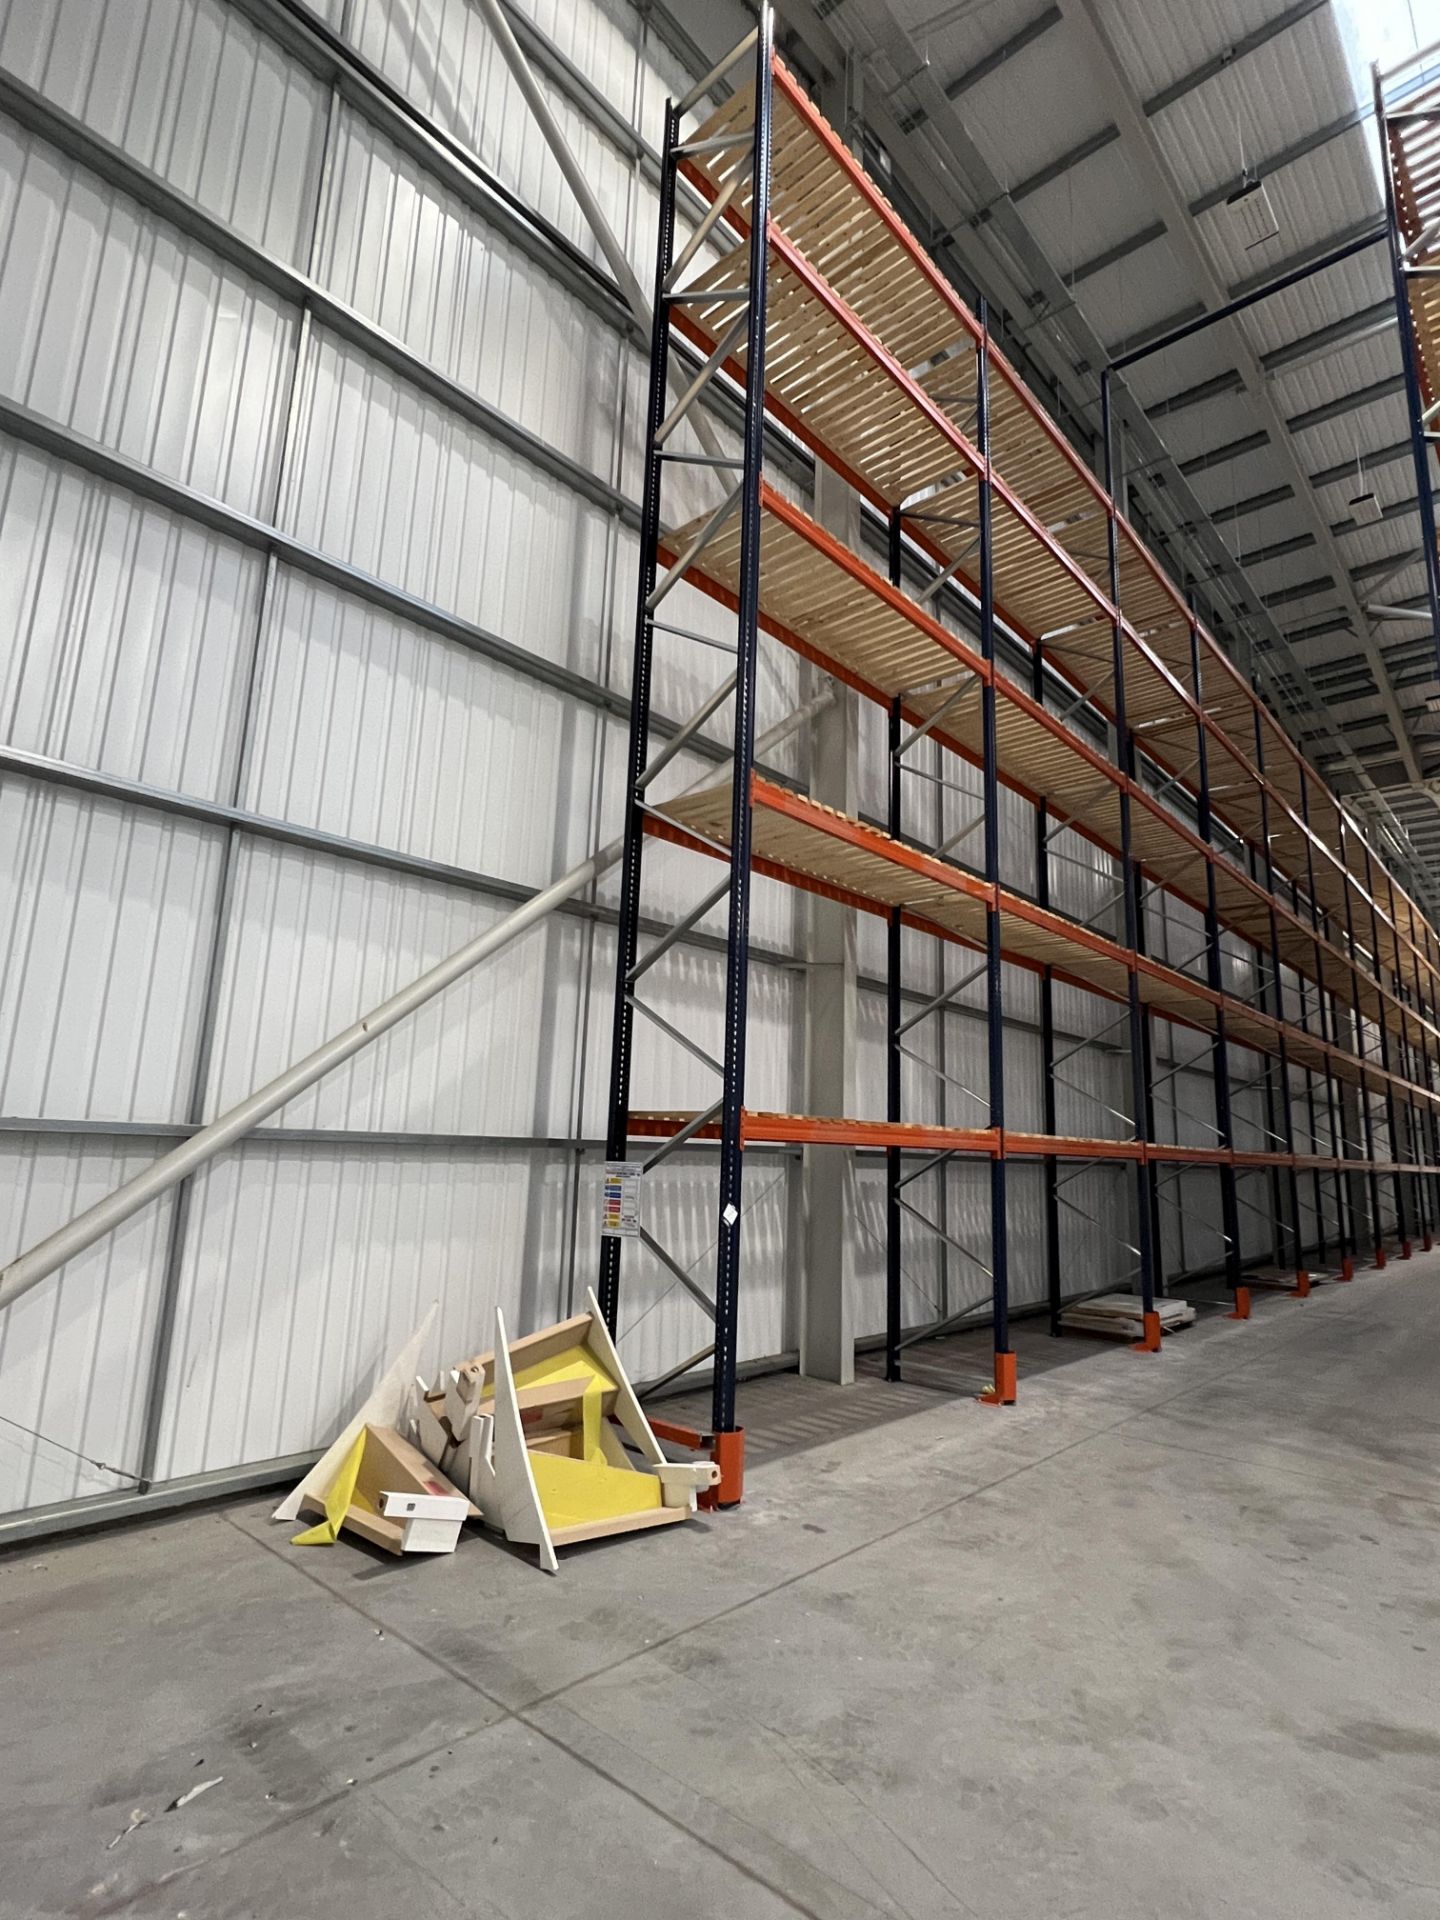 Mecalux M-22P high bay boltless pallet racking (2021), a 53 metre single run with 16 bays, to